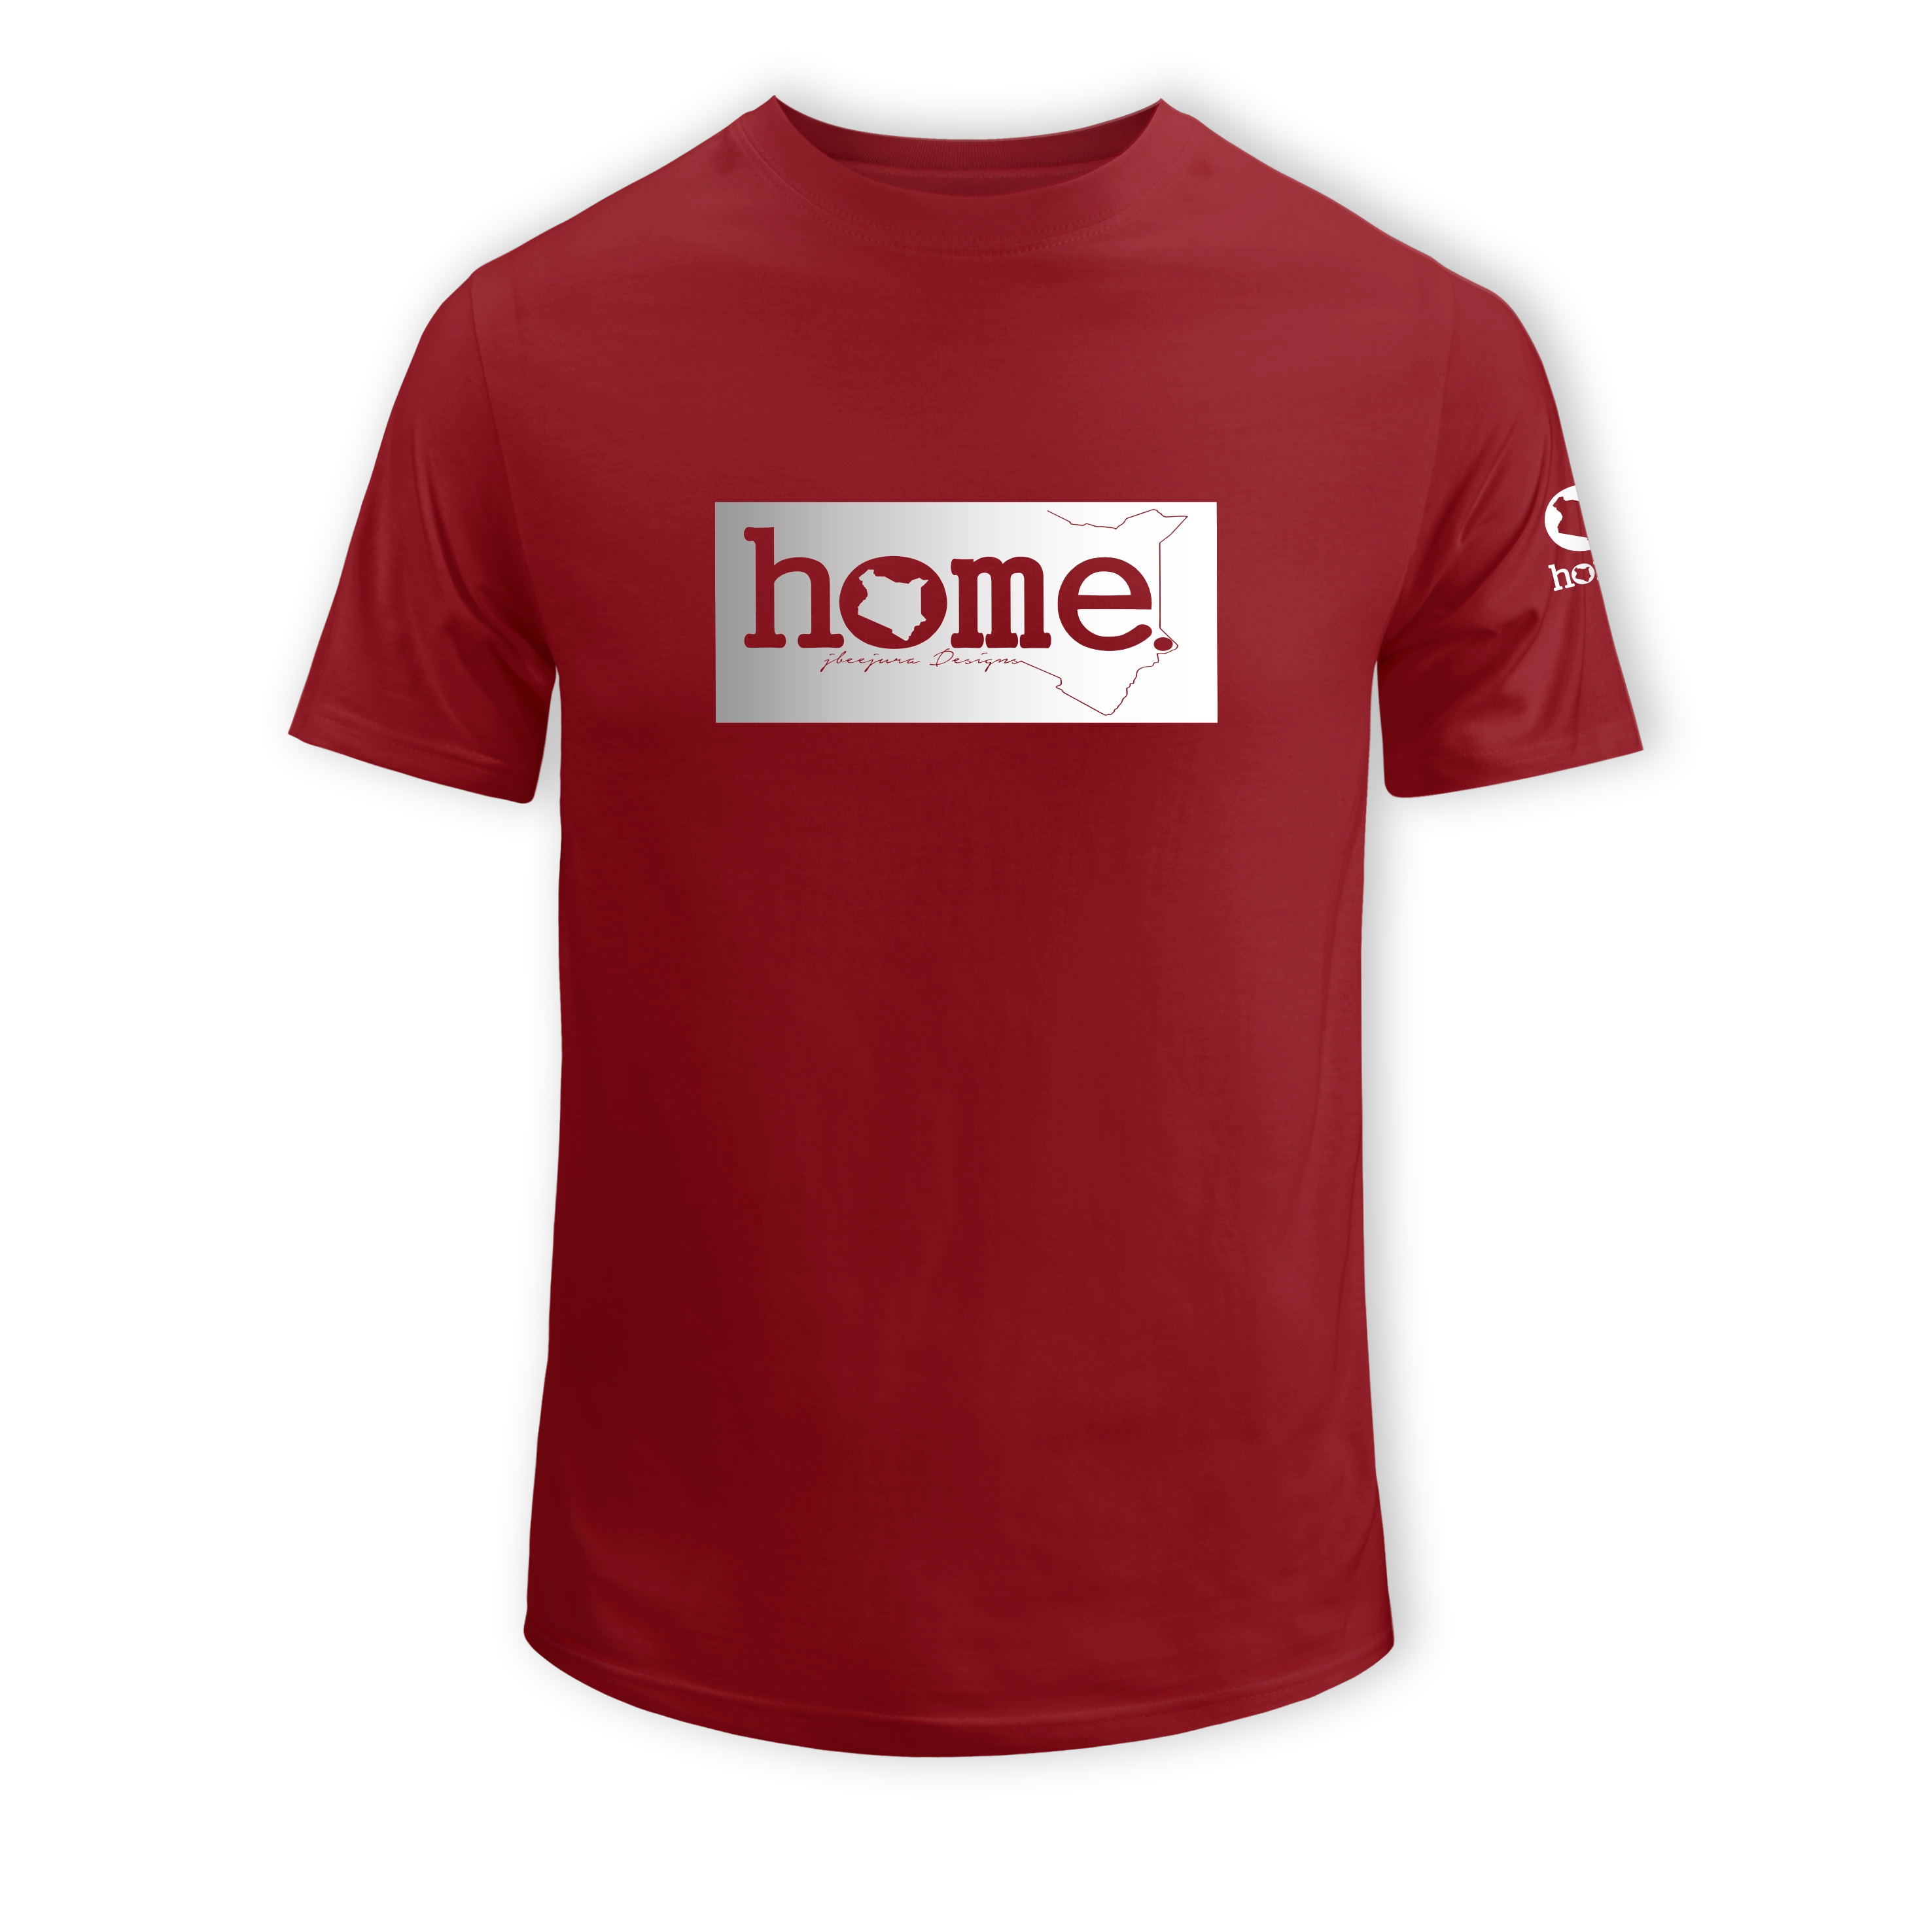 home_254 SHORT-SLEEVED MAROON RED T-SHIRT WITH A SILVER CLASSIC PRINT – COTTON PLUS FABRIC